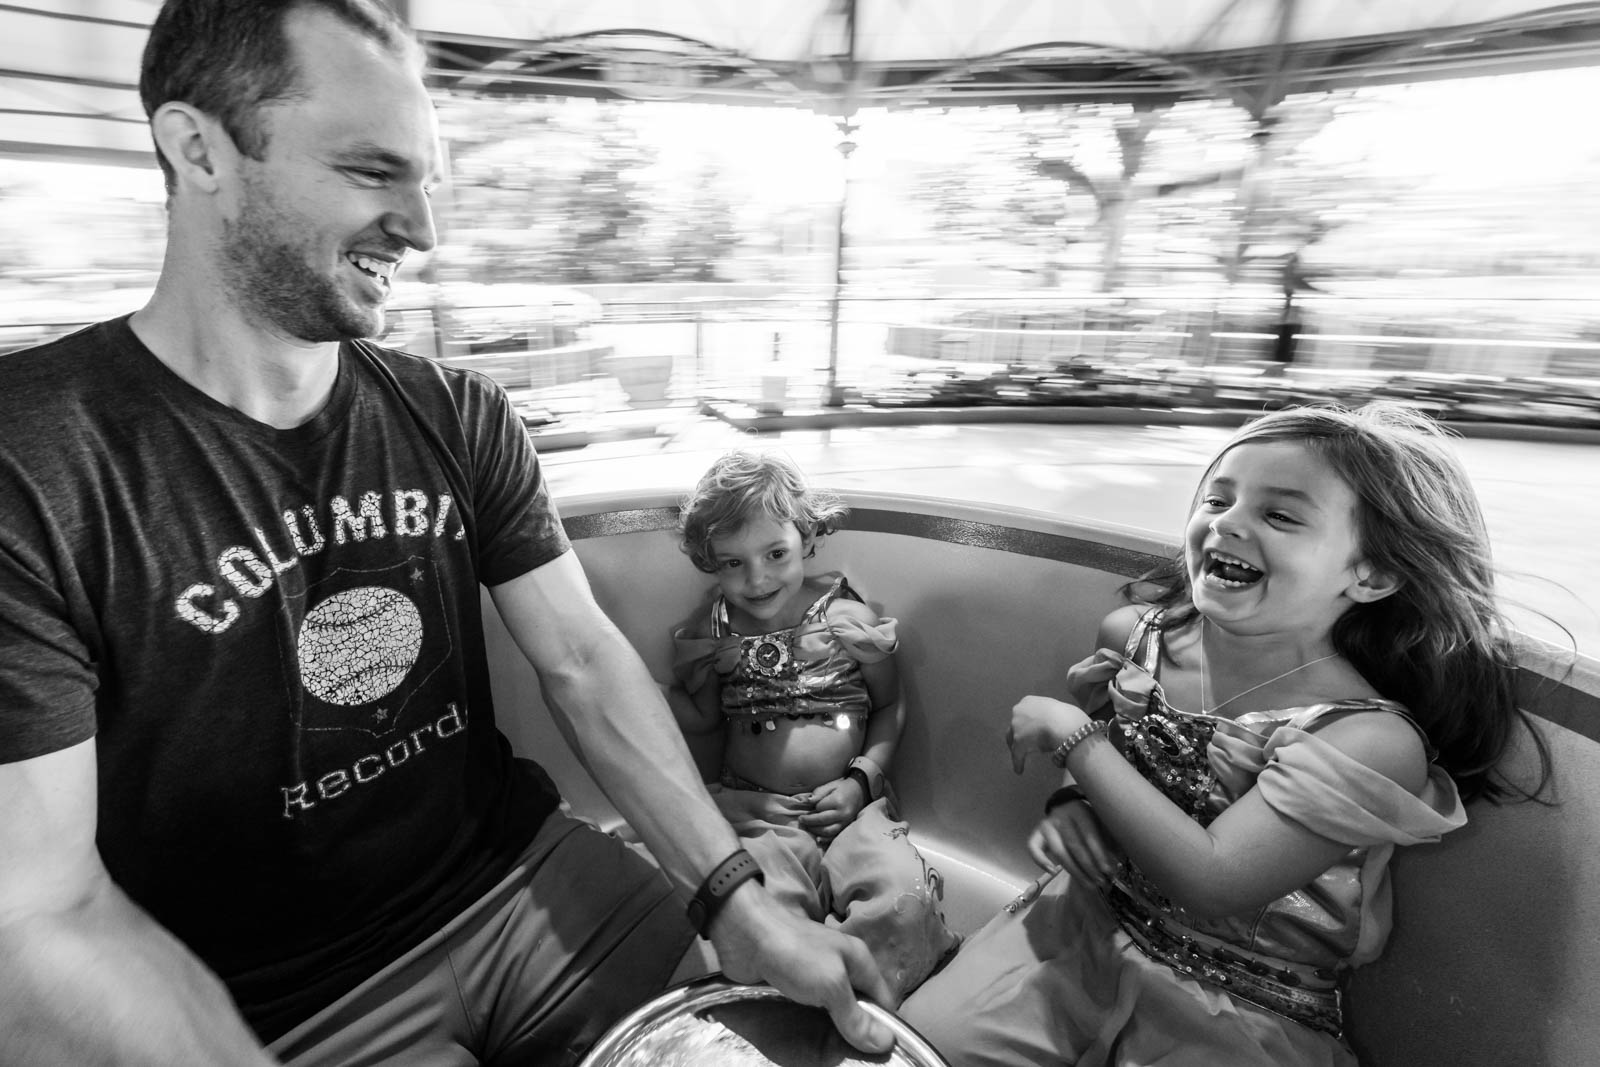 dad and two kids spinning on the teacups at magic kingdom